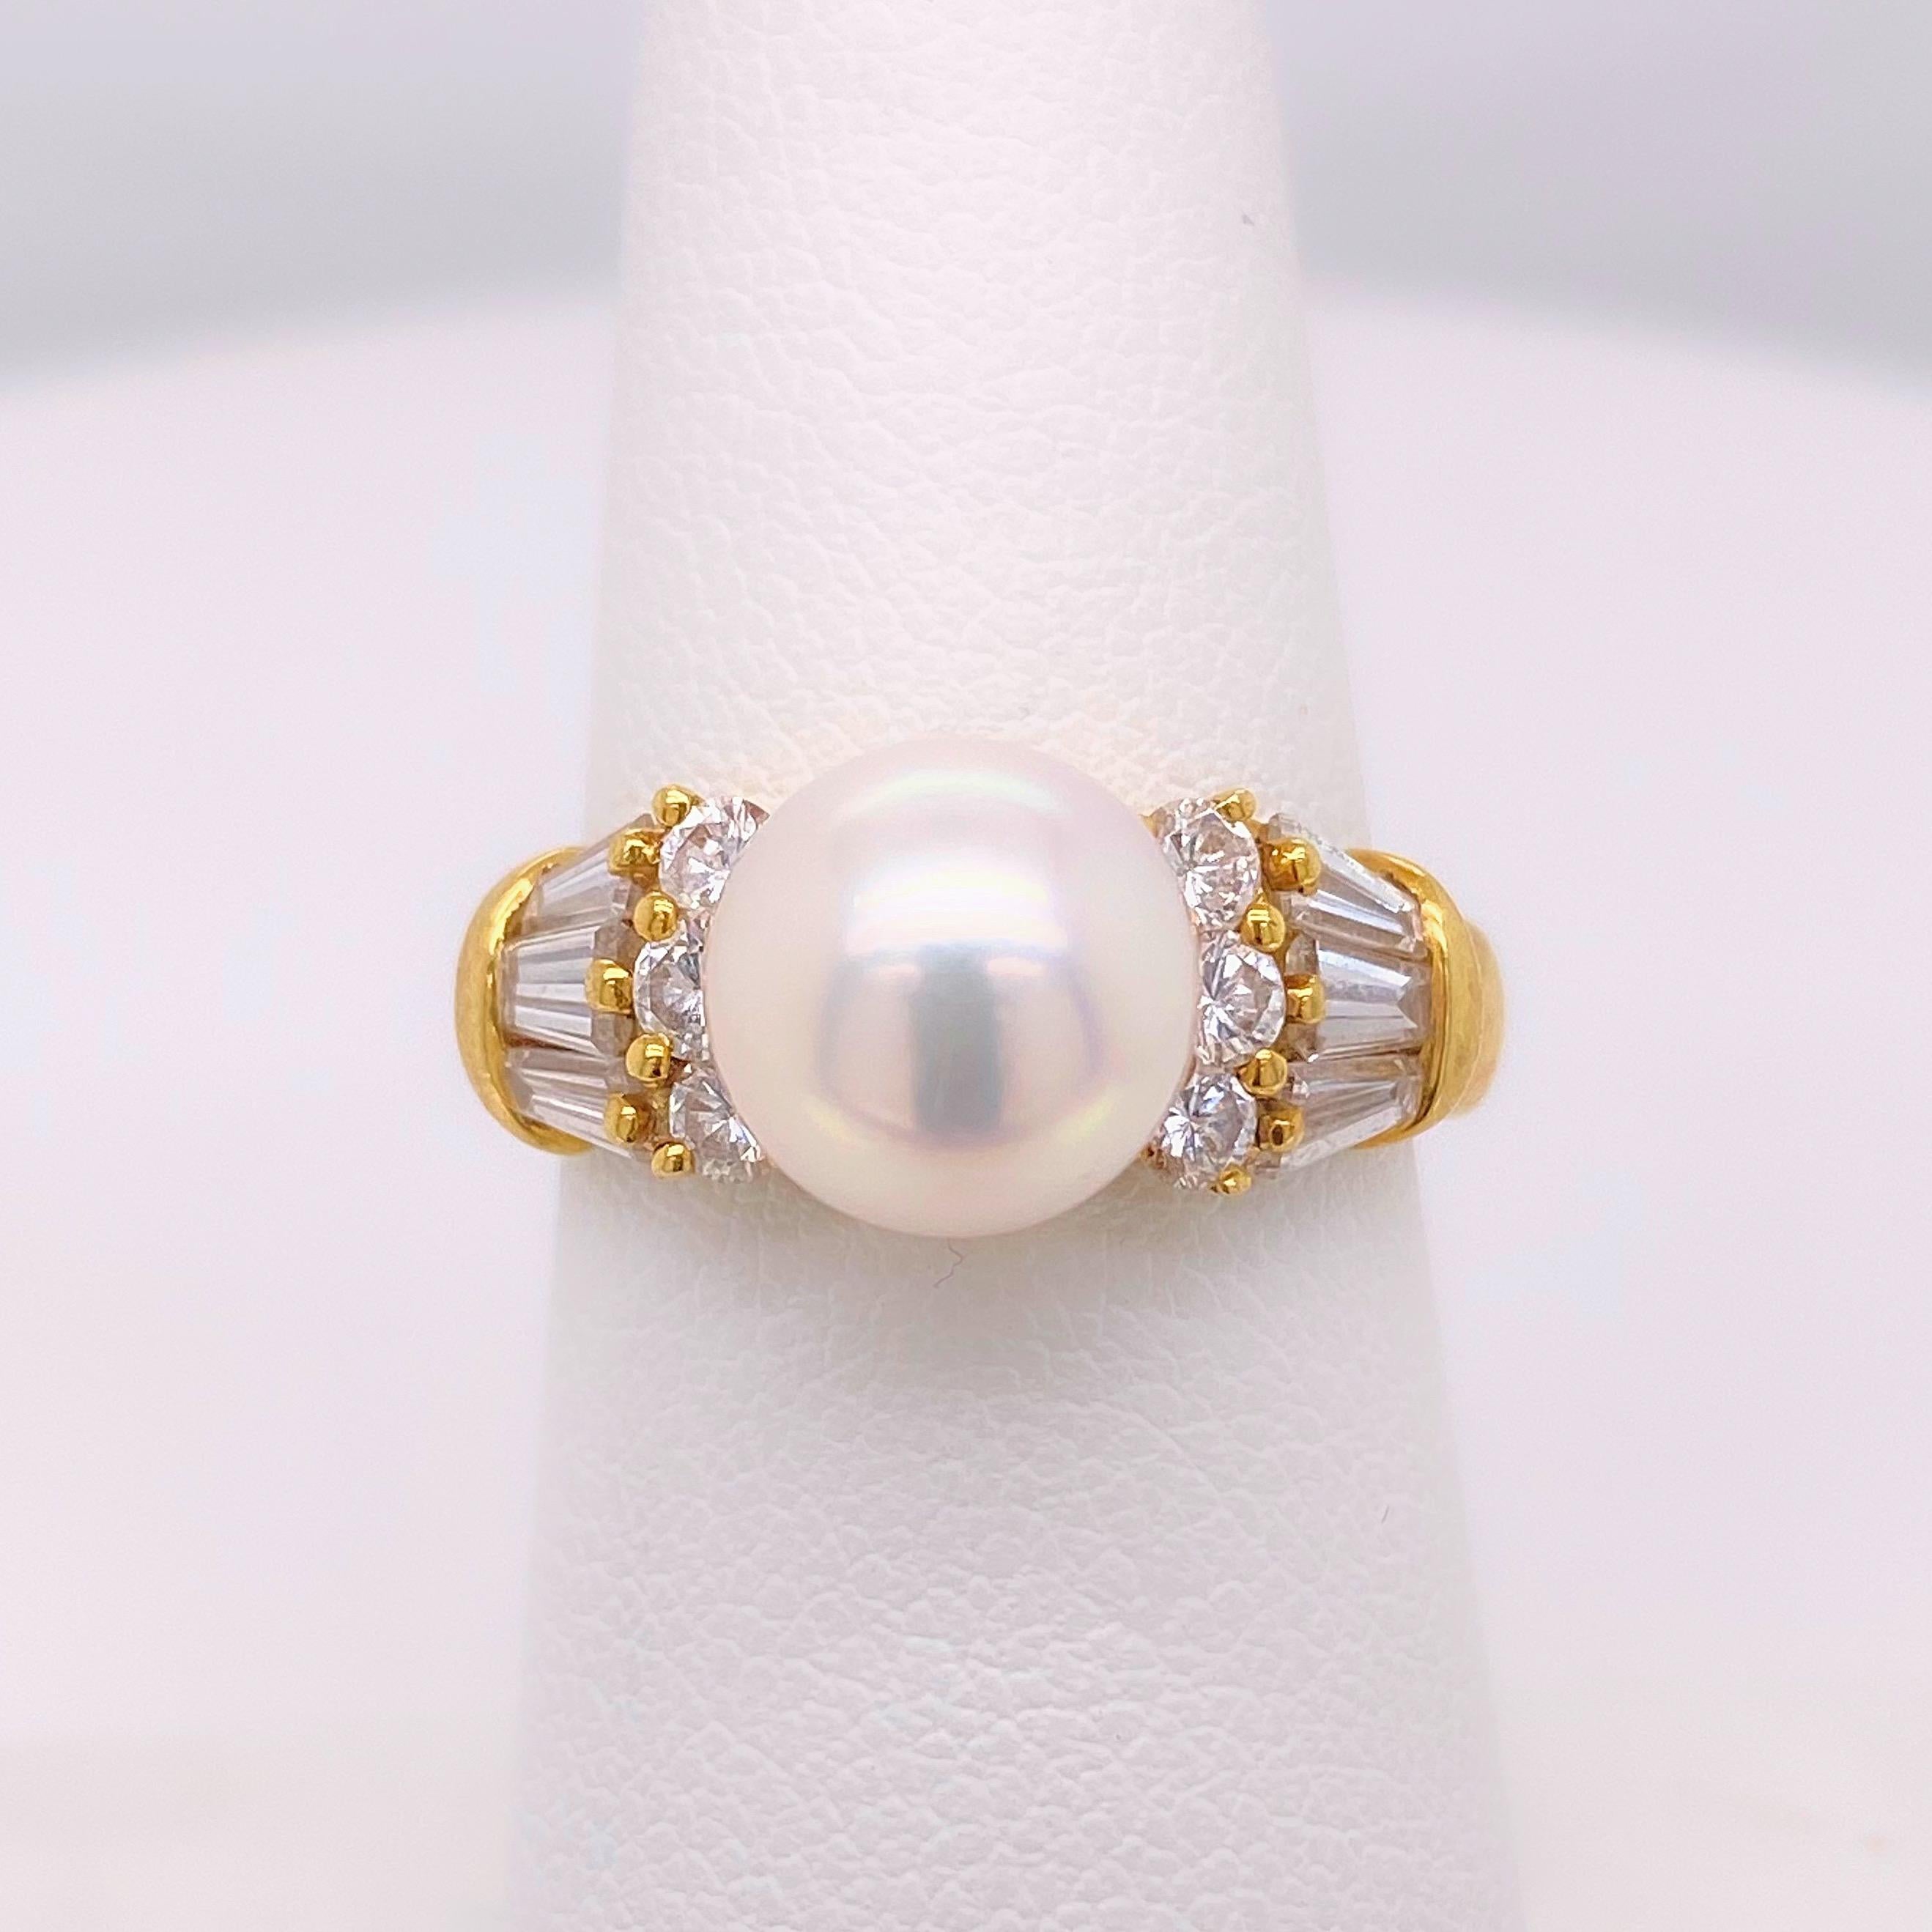 Mikimoto Akoya Pearl & Diamond Ring
Style:  8.5 mm Pearl & Diamond Cocktail Ring
Metal:  18K Yellow Gold
Size / Measurements:  Ring Size 6
TCW:  0.75 Carats Total Approximate
Center Stone:  8.5 mm Akoya Cultured Pearl
Accent Diamonds:  6 Round